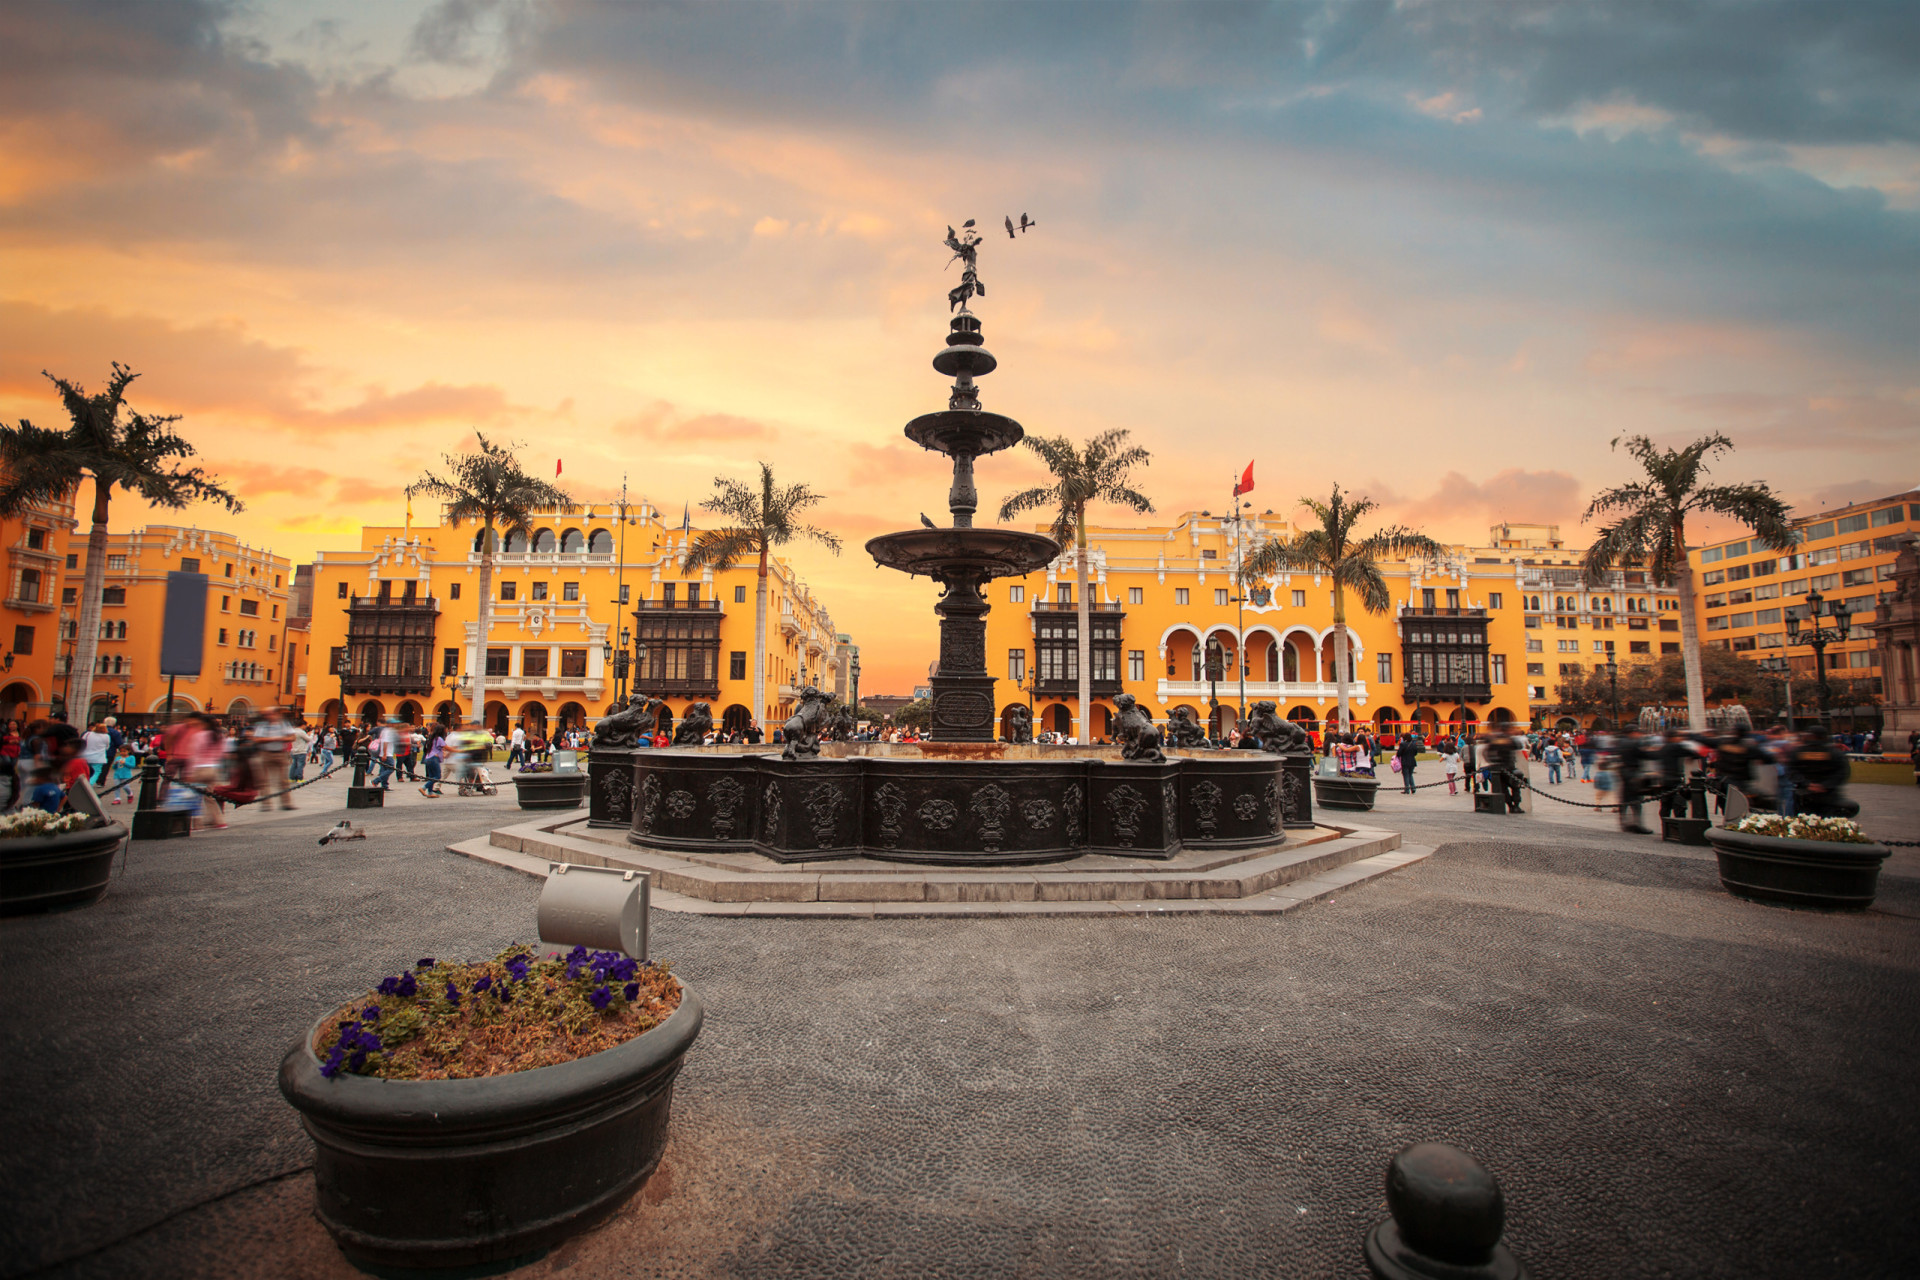 <p>The Peruvian capital city is known vividly for its culinary stardom. In fact, two restaurants in Lima appeared in the top 10 of The World's 50 Best Restaurants, with Central taking first place.</p><p>You may also like:<a href="https://www.starsinsider.com/n/372700?utm_source=msn.com&utm_medium=display&utm_campaign=referral_description&utm_content=701834en-us"> Nicole Kidman's transformations on and off-screen</a></p>